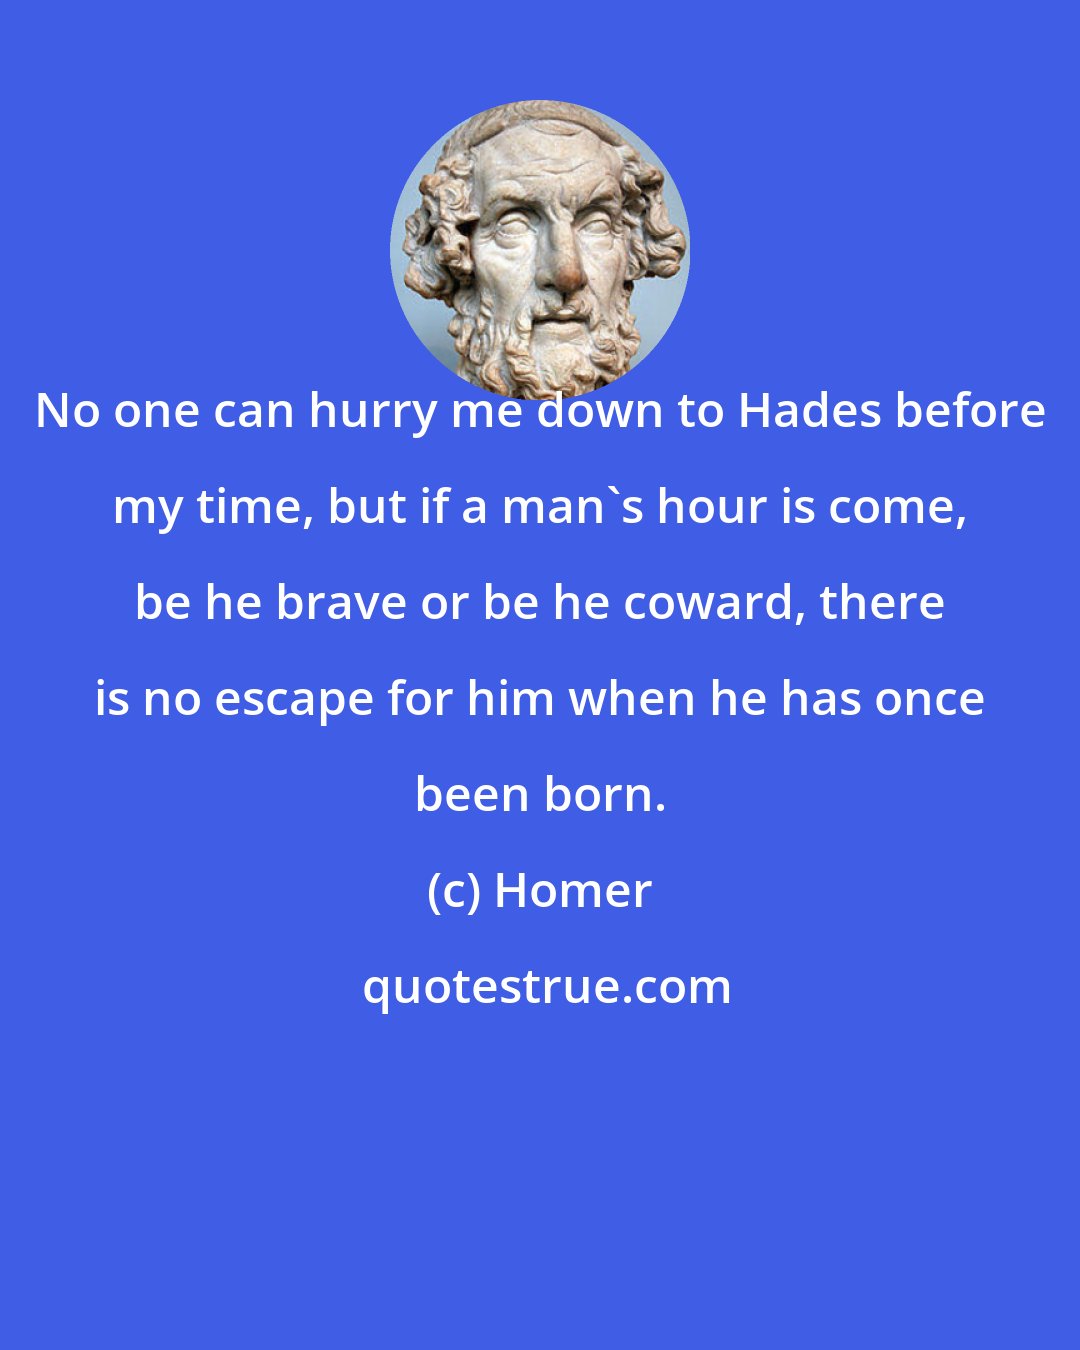 Homer: No one can hurry me down to Hades before my time, but if a man's hour is come, be he brave or be he coward, there is no escape for him when he has once been born.